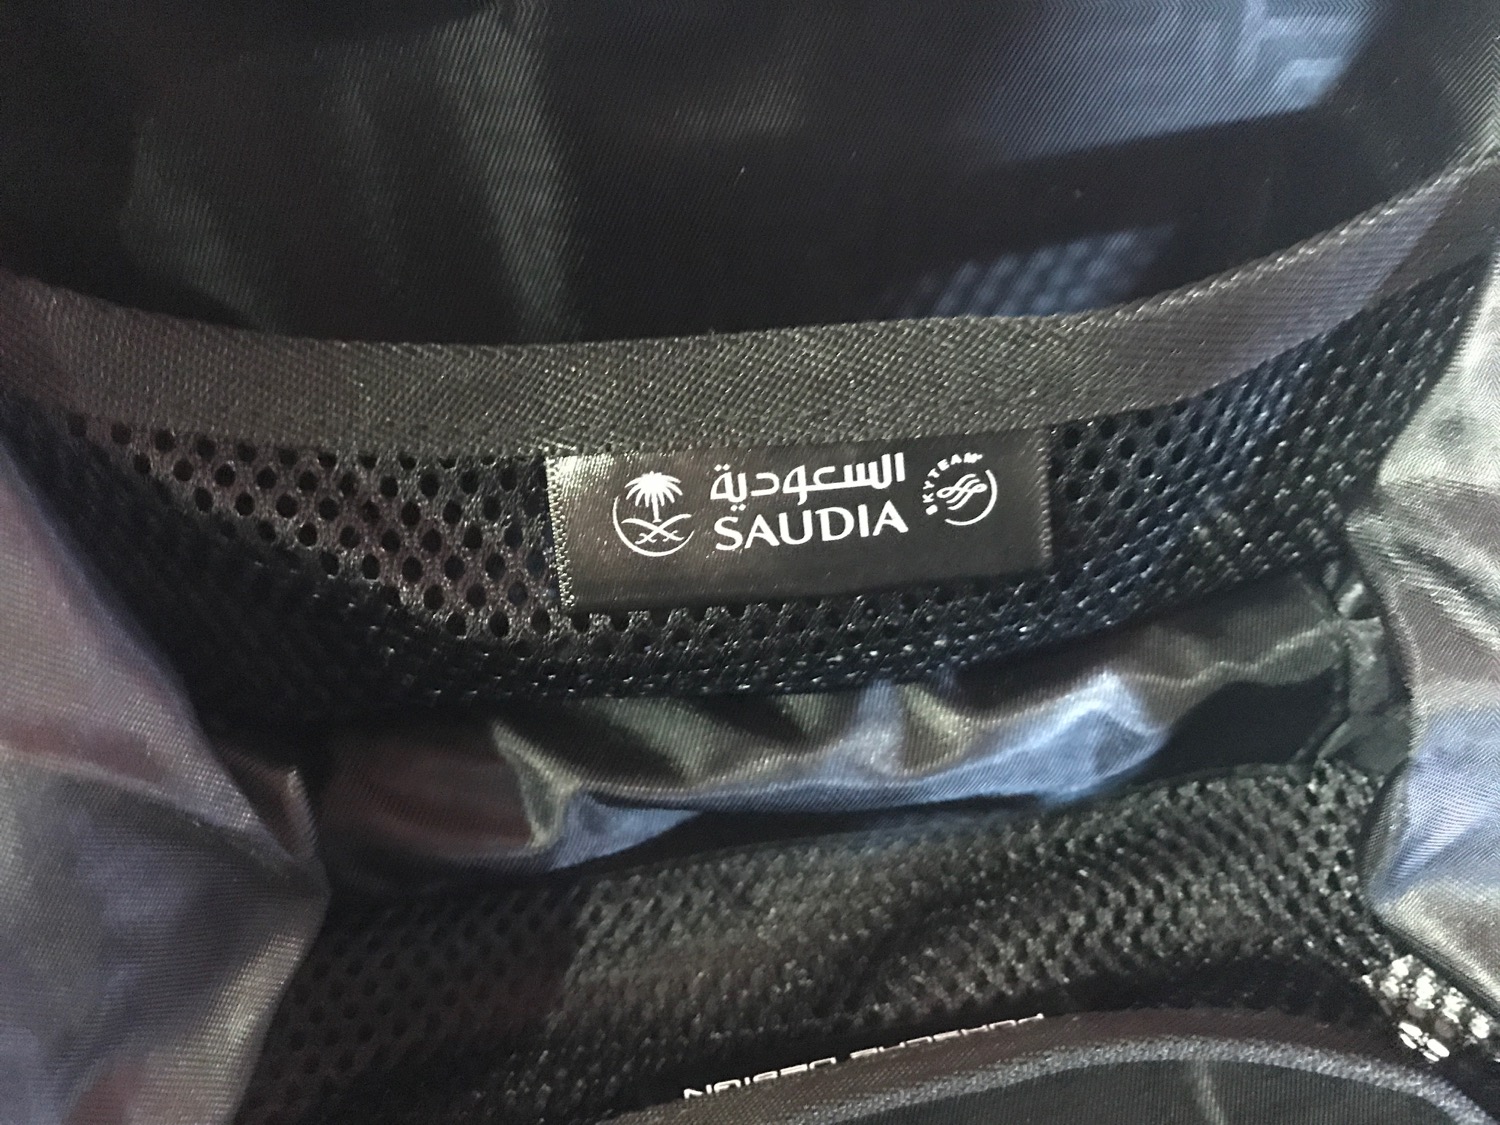 a black bag with a label